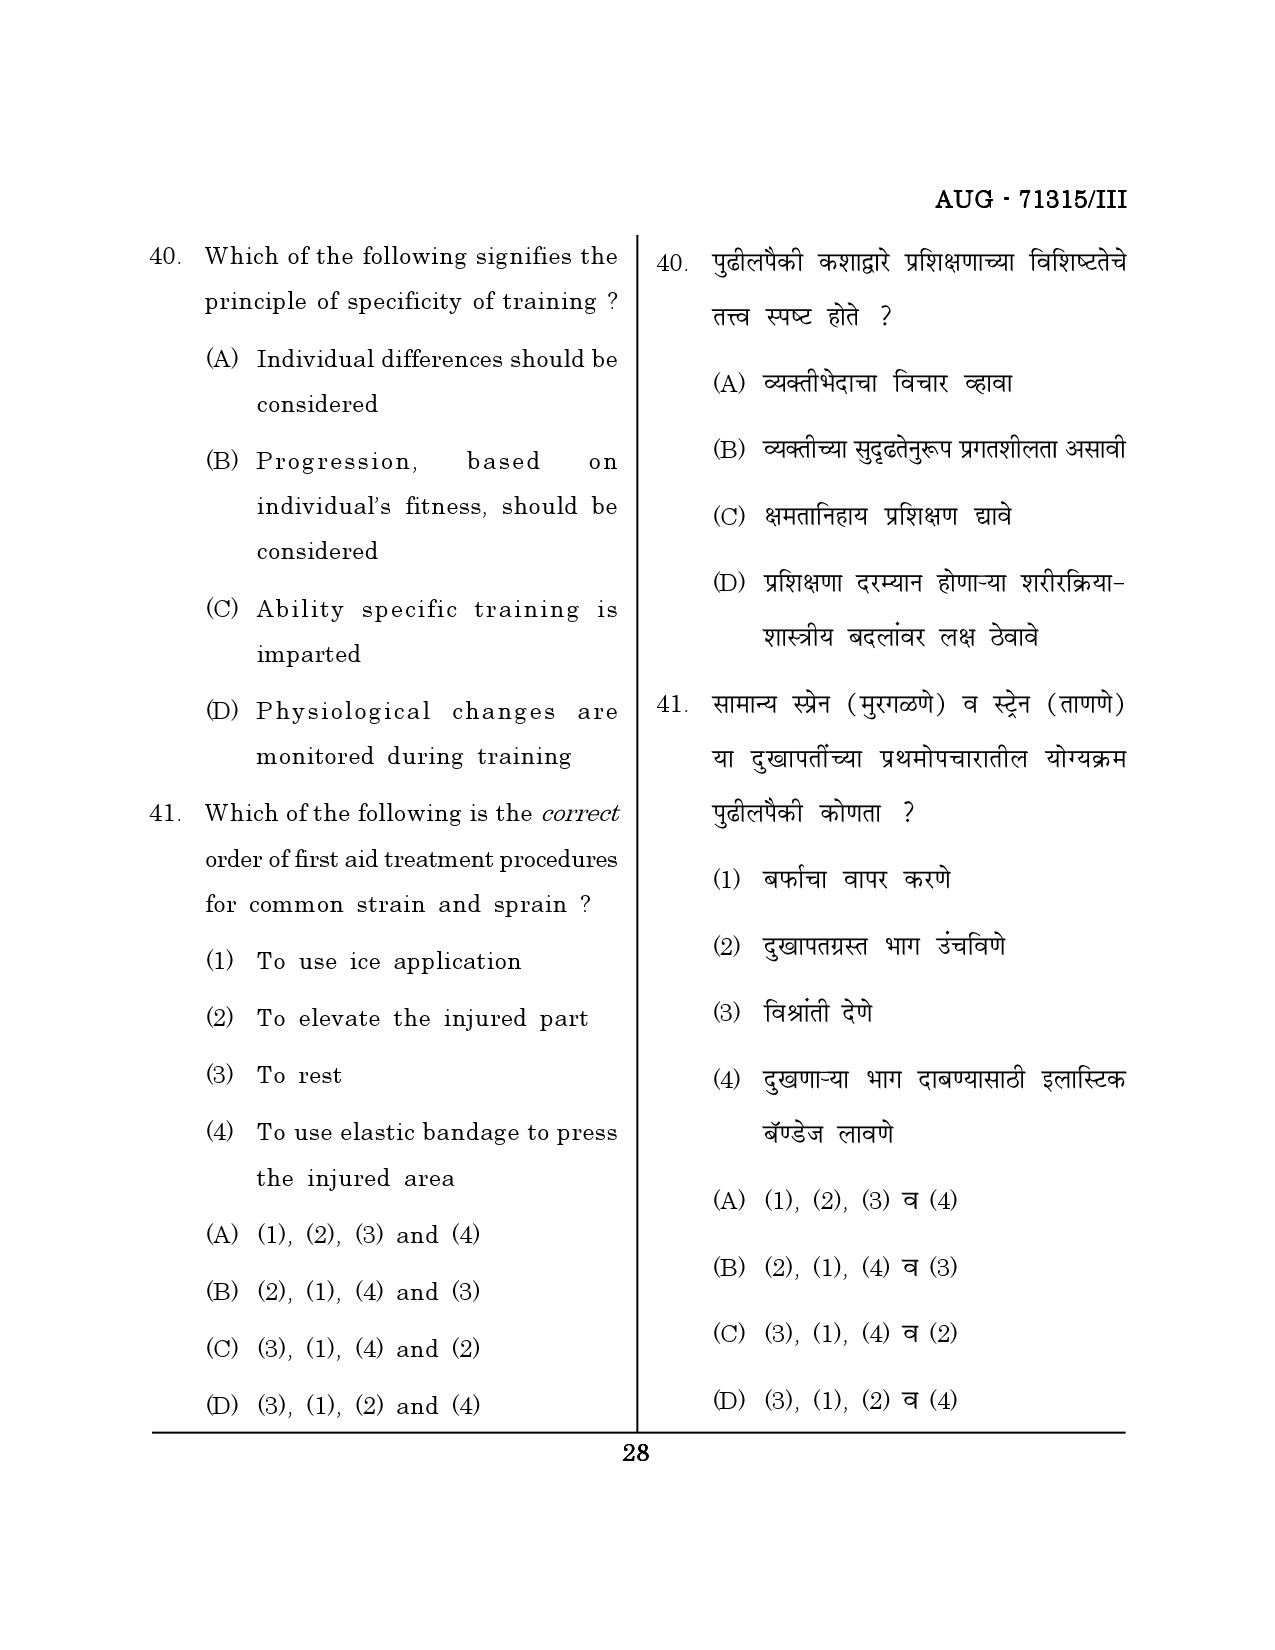 Maharashtra SET Physical Education Question Paper III August 2015 27